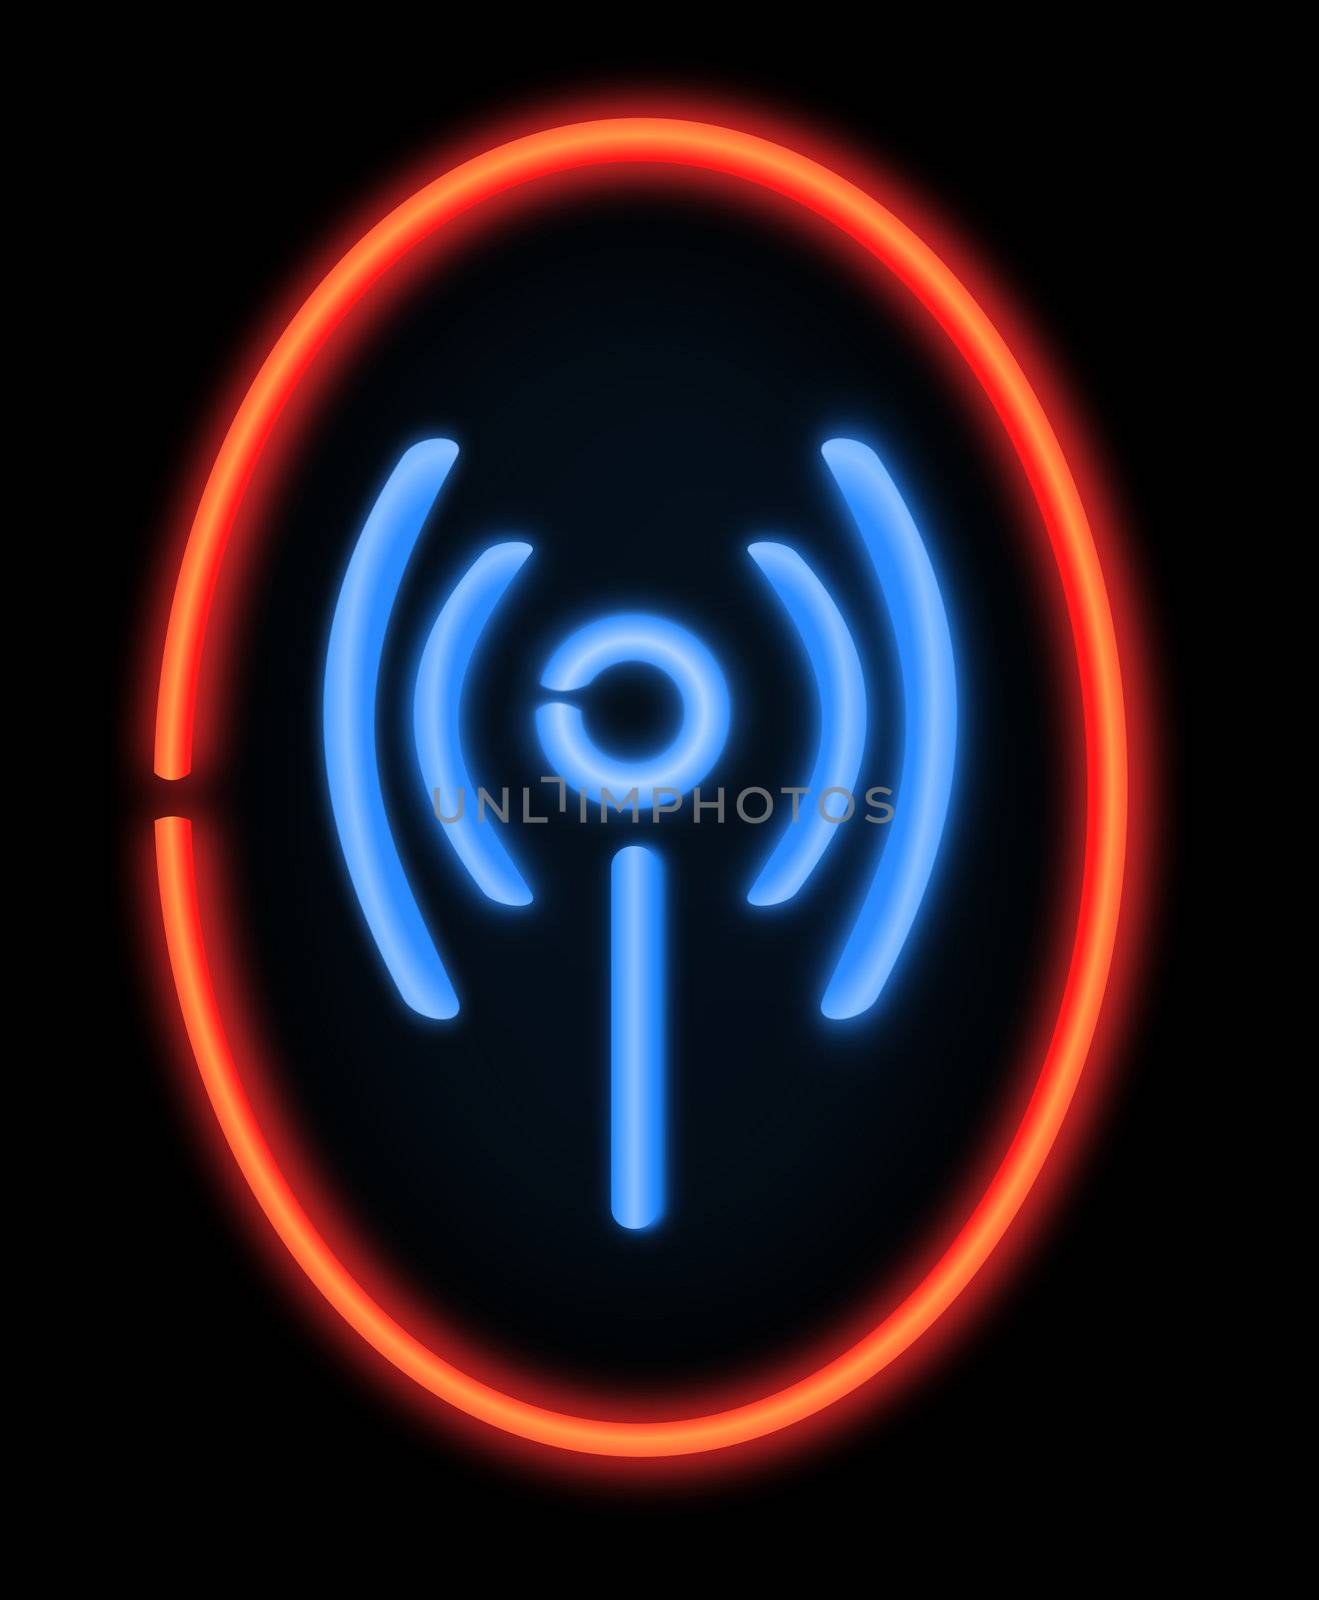 Illustration depicting a illuminated neon sign in the shape of a wireless symbol. Black background.